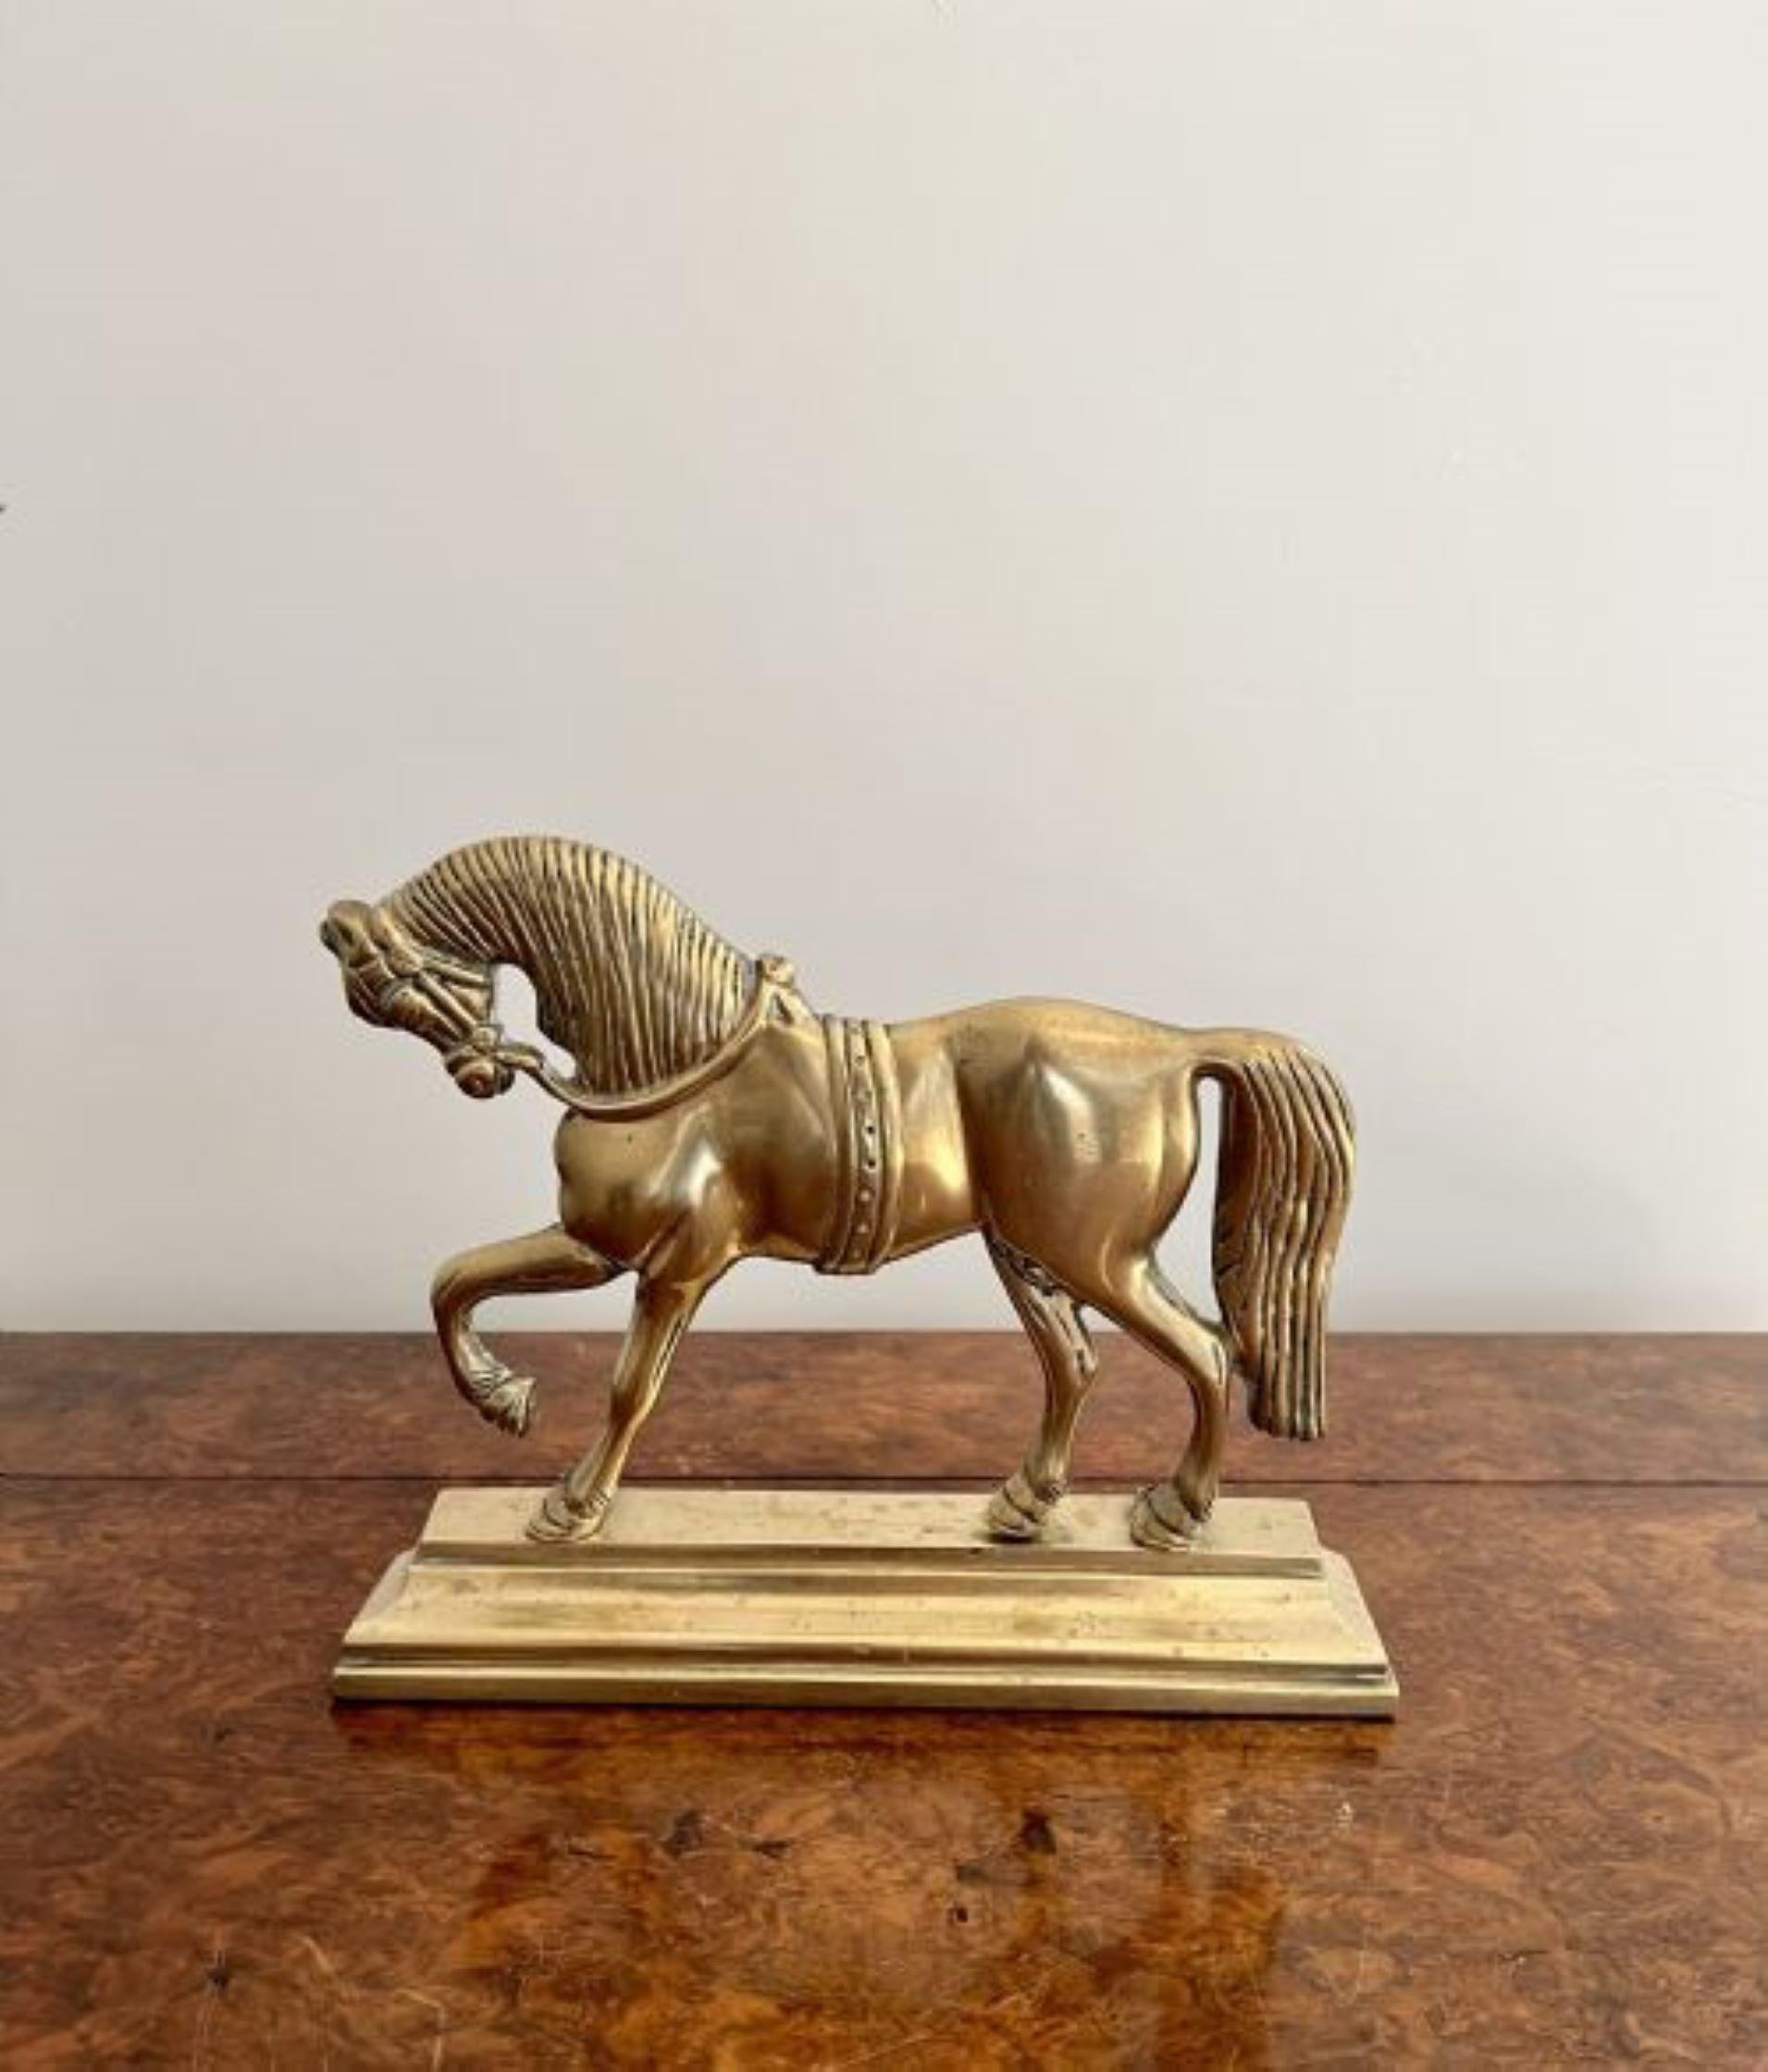 Quality pair of antique Victorian brass door stops depicting a fantastic solid brass model of a horse standing on a shaped brass moulded base.